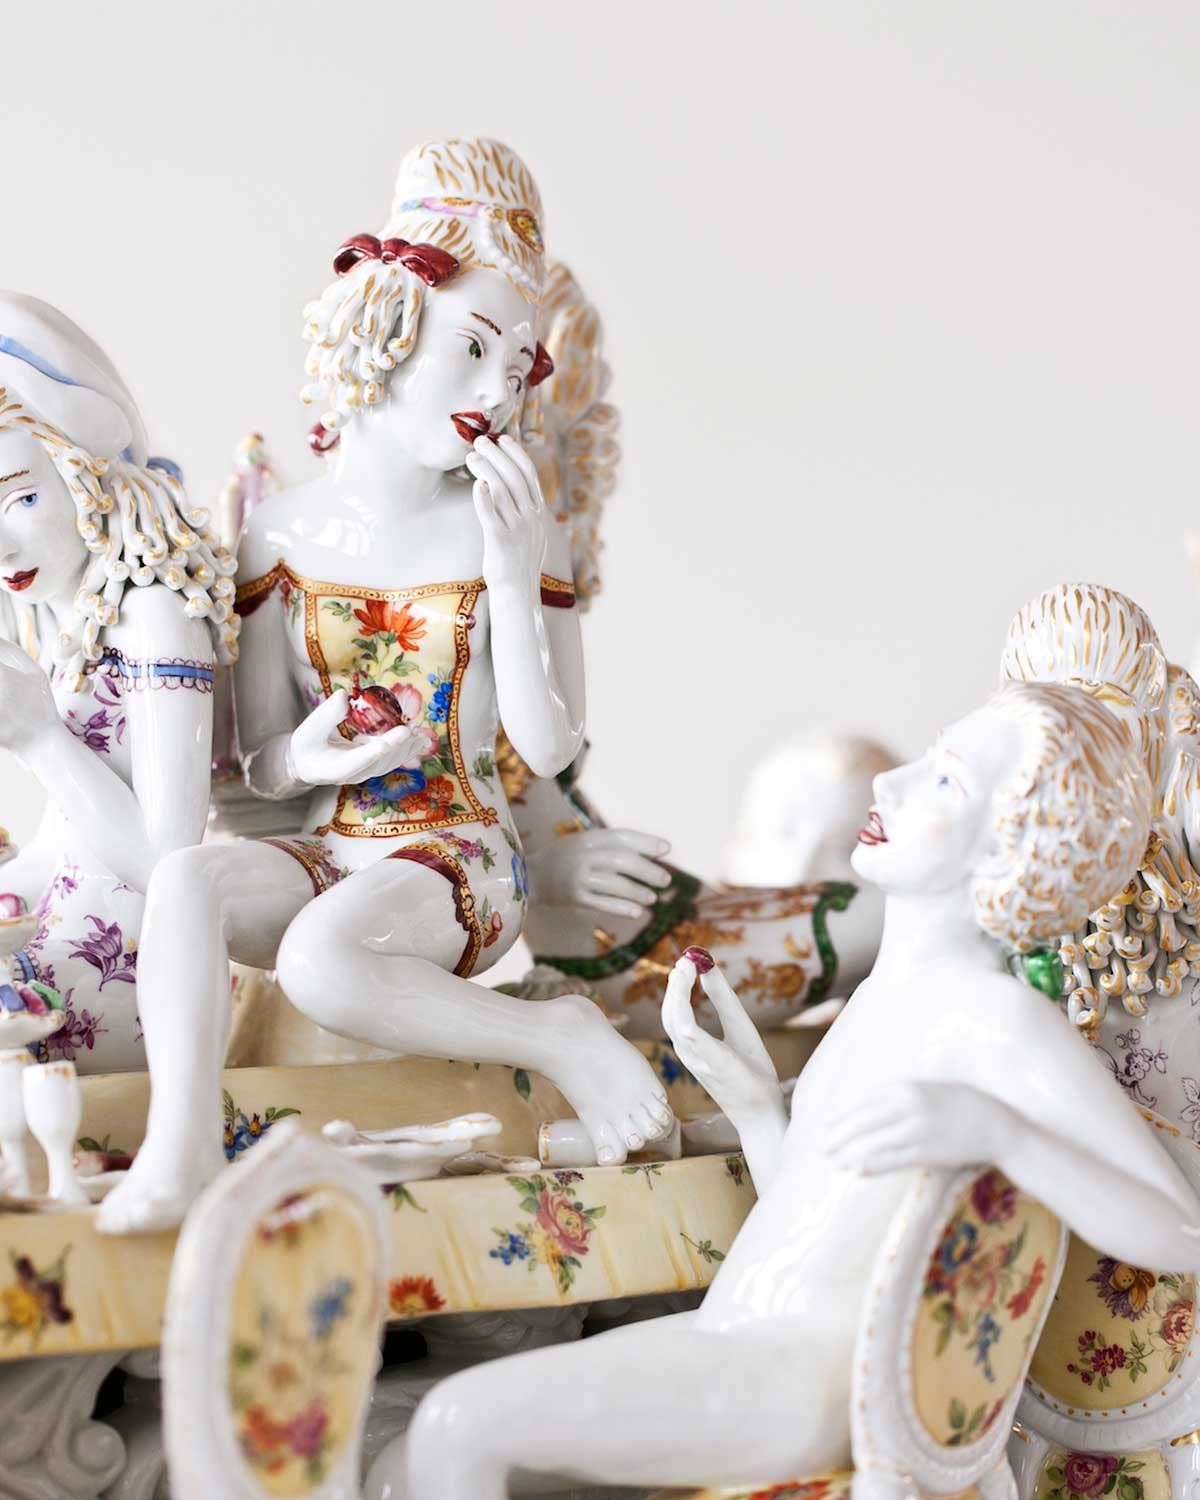 These Porcelain Sculptures Tease Lust and Seduction Through Culinary Excess